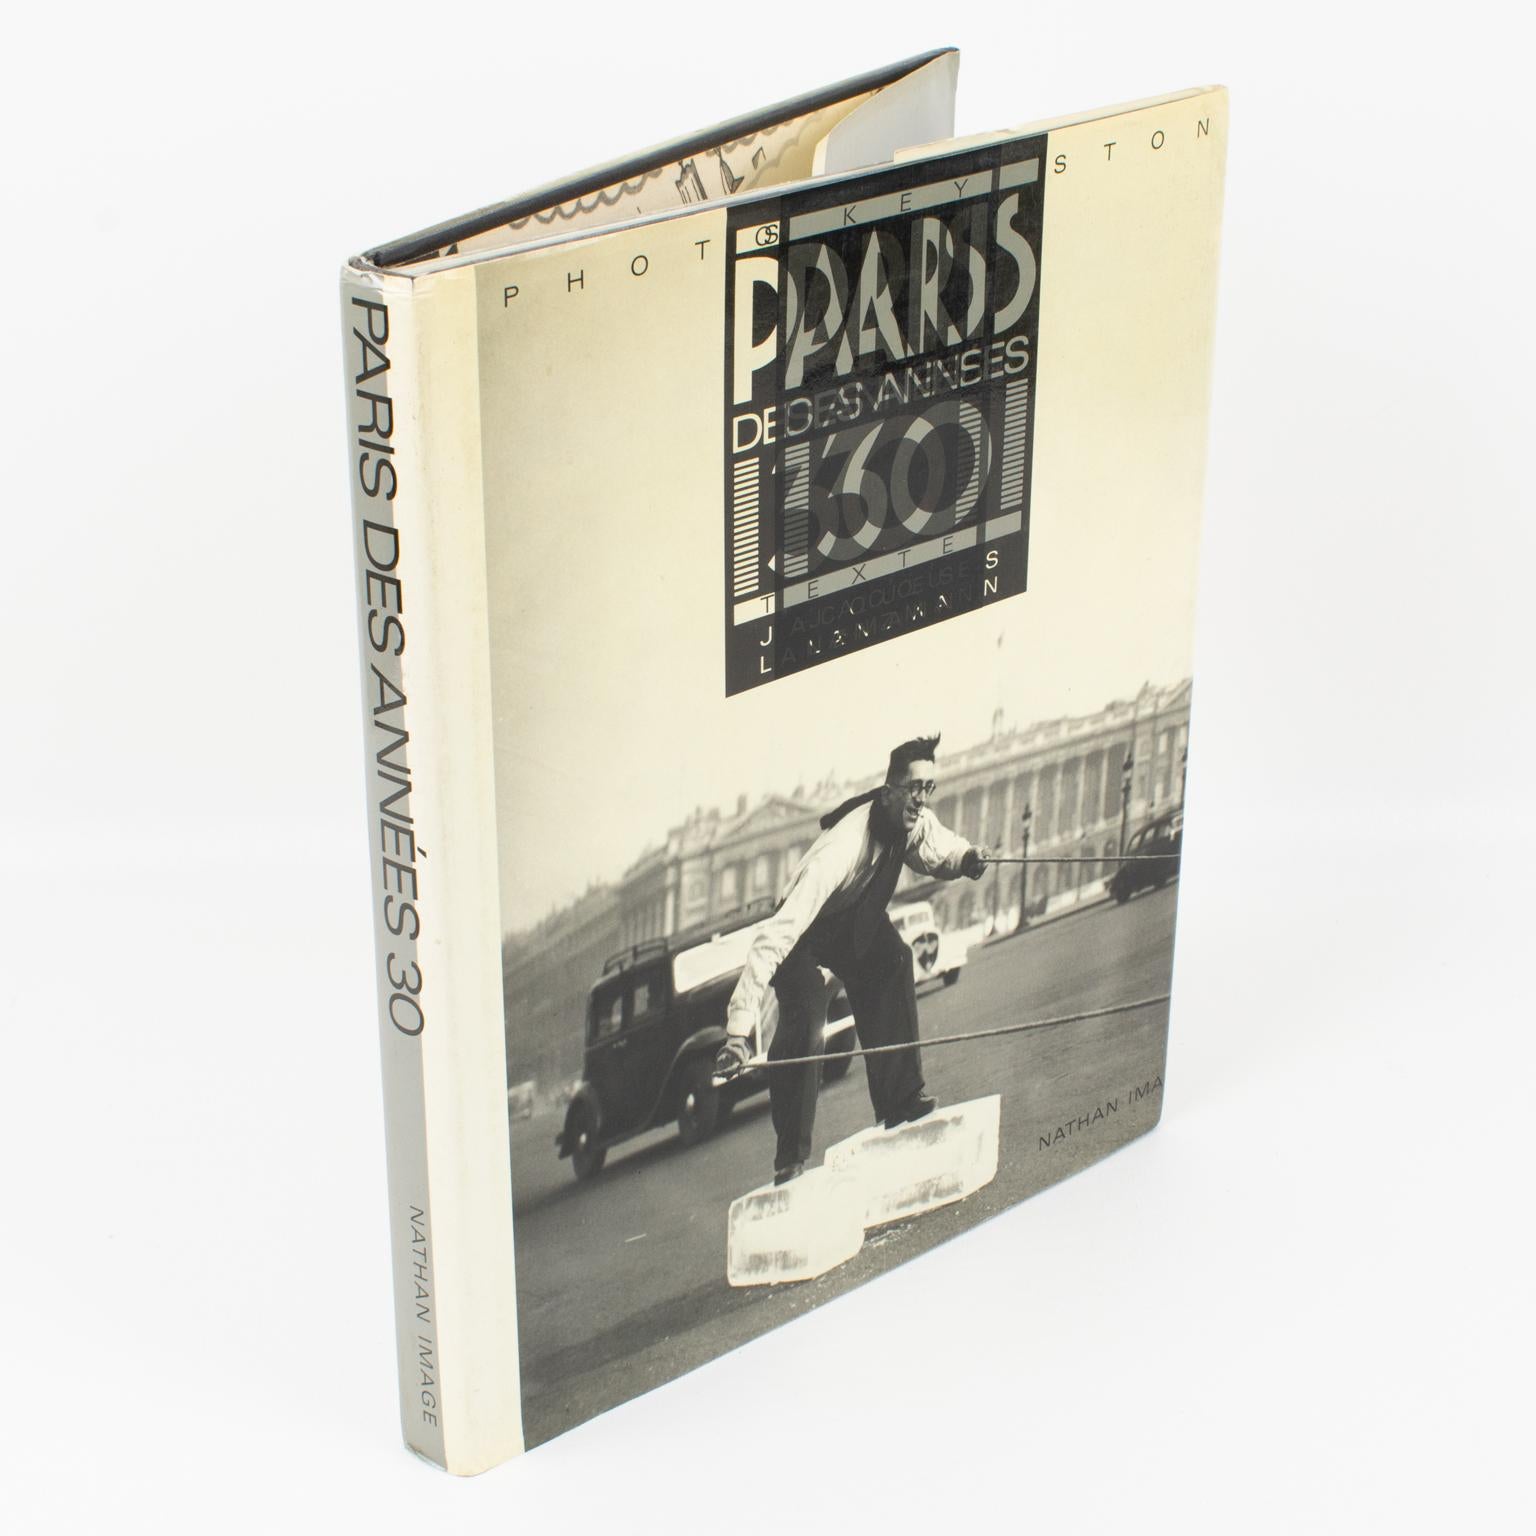 Paris des Années 30, (Paris in The Thirties), French Book by Jacques Lanzmann, 1987.
Numerous photographs in black and white from the Keystone press agency in Paris illustrating the text by Jacques Lanzmann
Our postmodern eighties have doom and